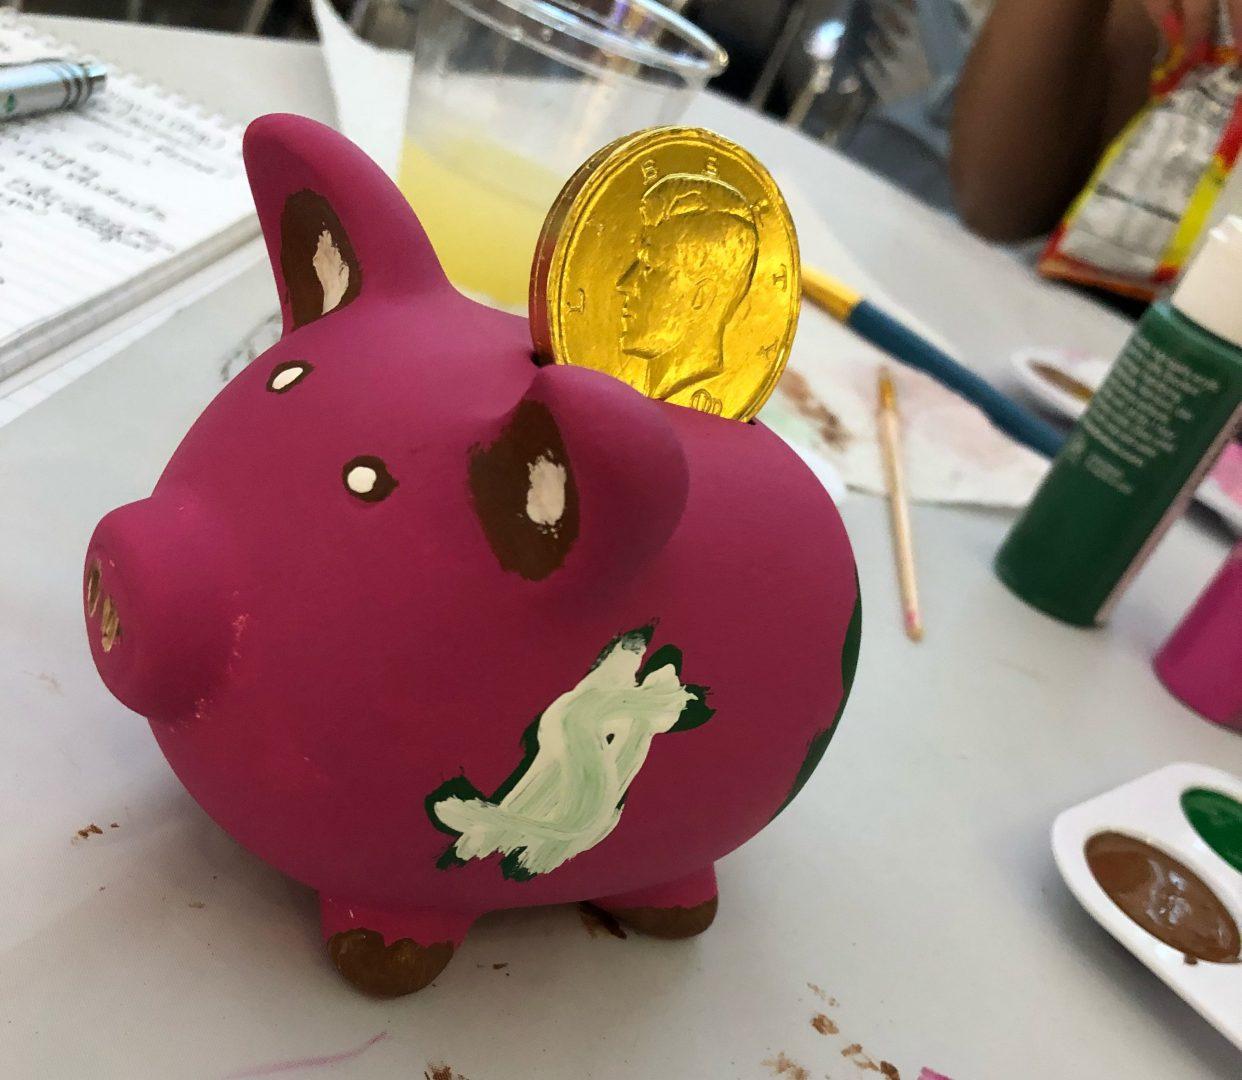 Students+learn+about+finances+by+painting+piggy+banks